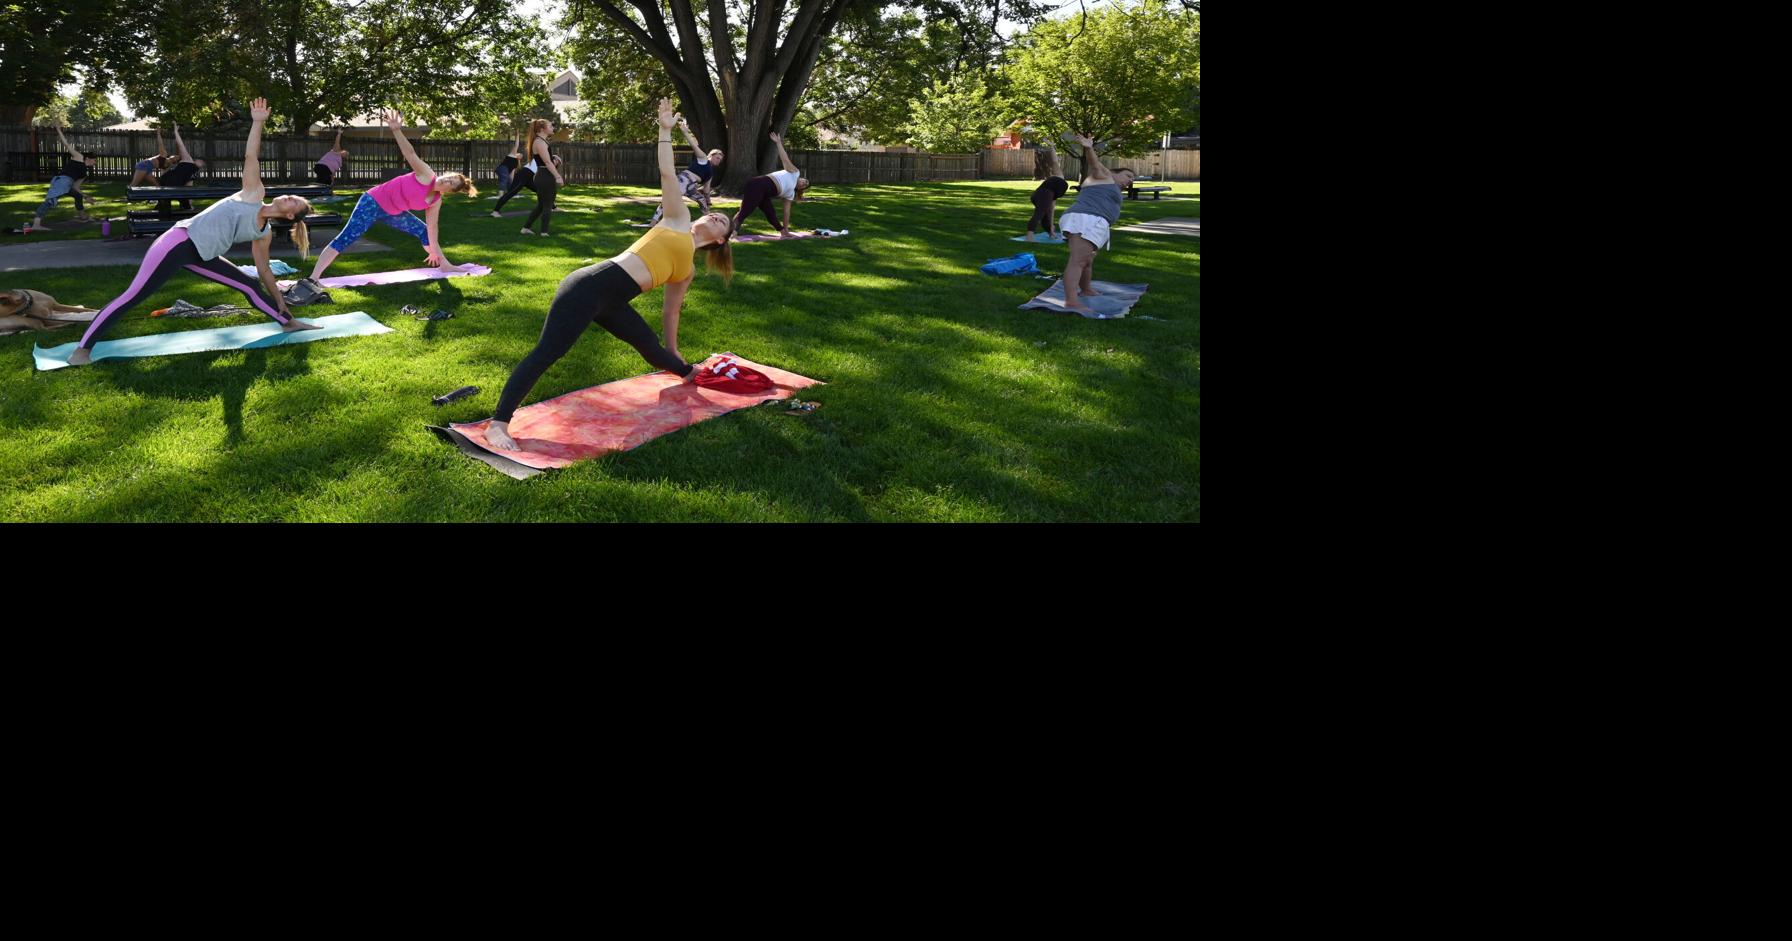 City of Melville - 🧘 🧘 Free yoga will be back from Saturday, 8 February  for our next season of Active in the Park! Get your zen on and register now  for